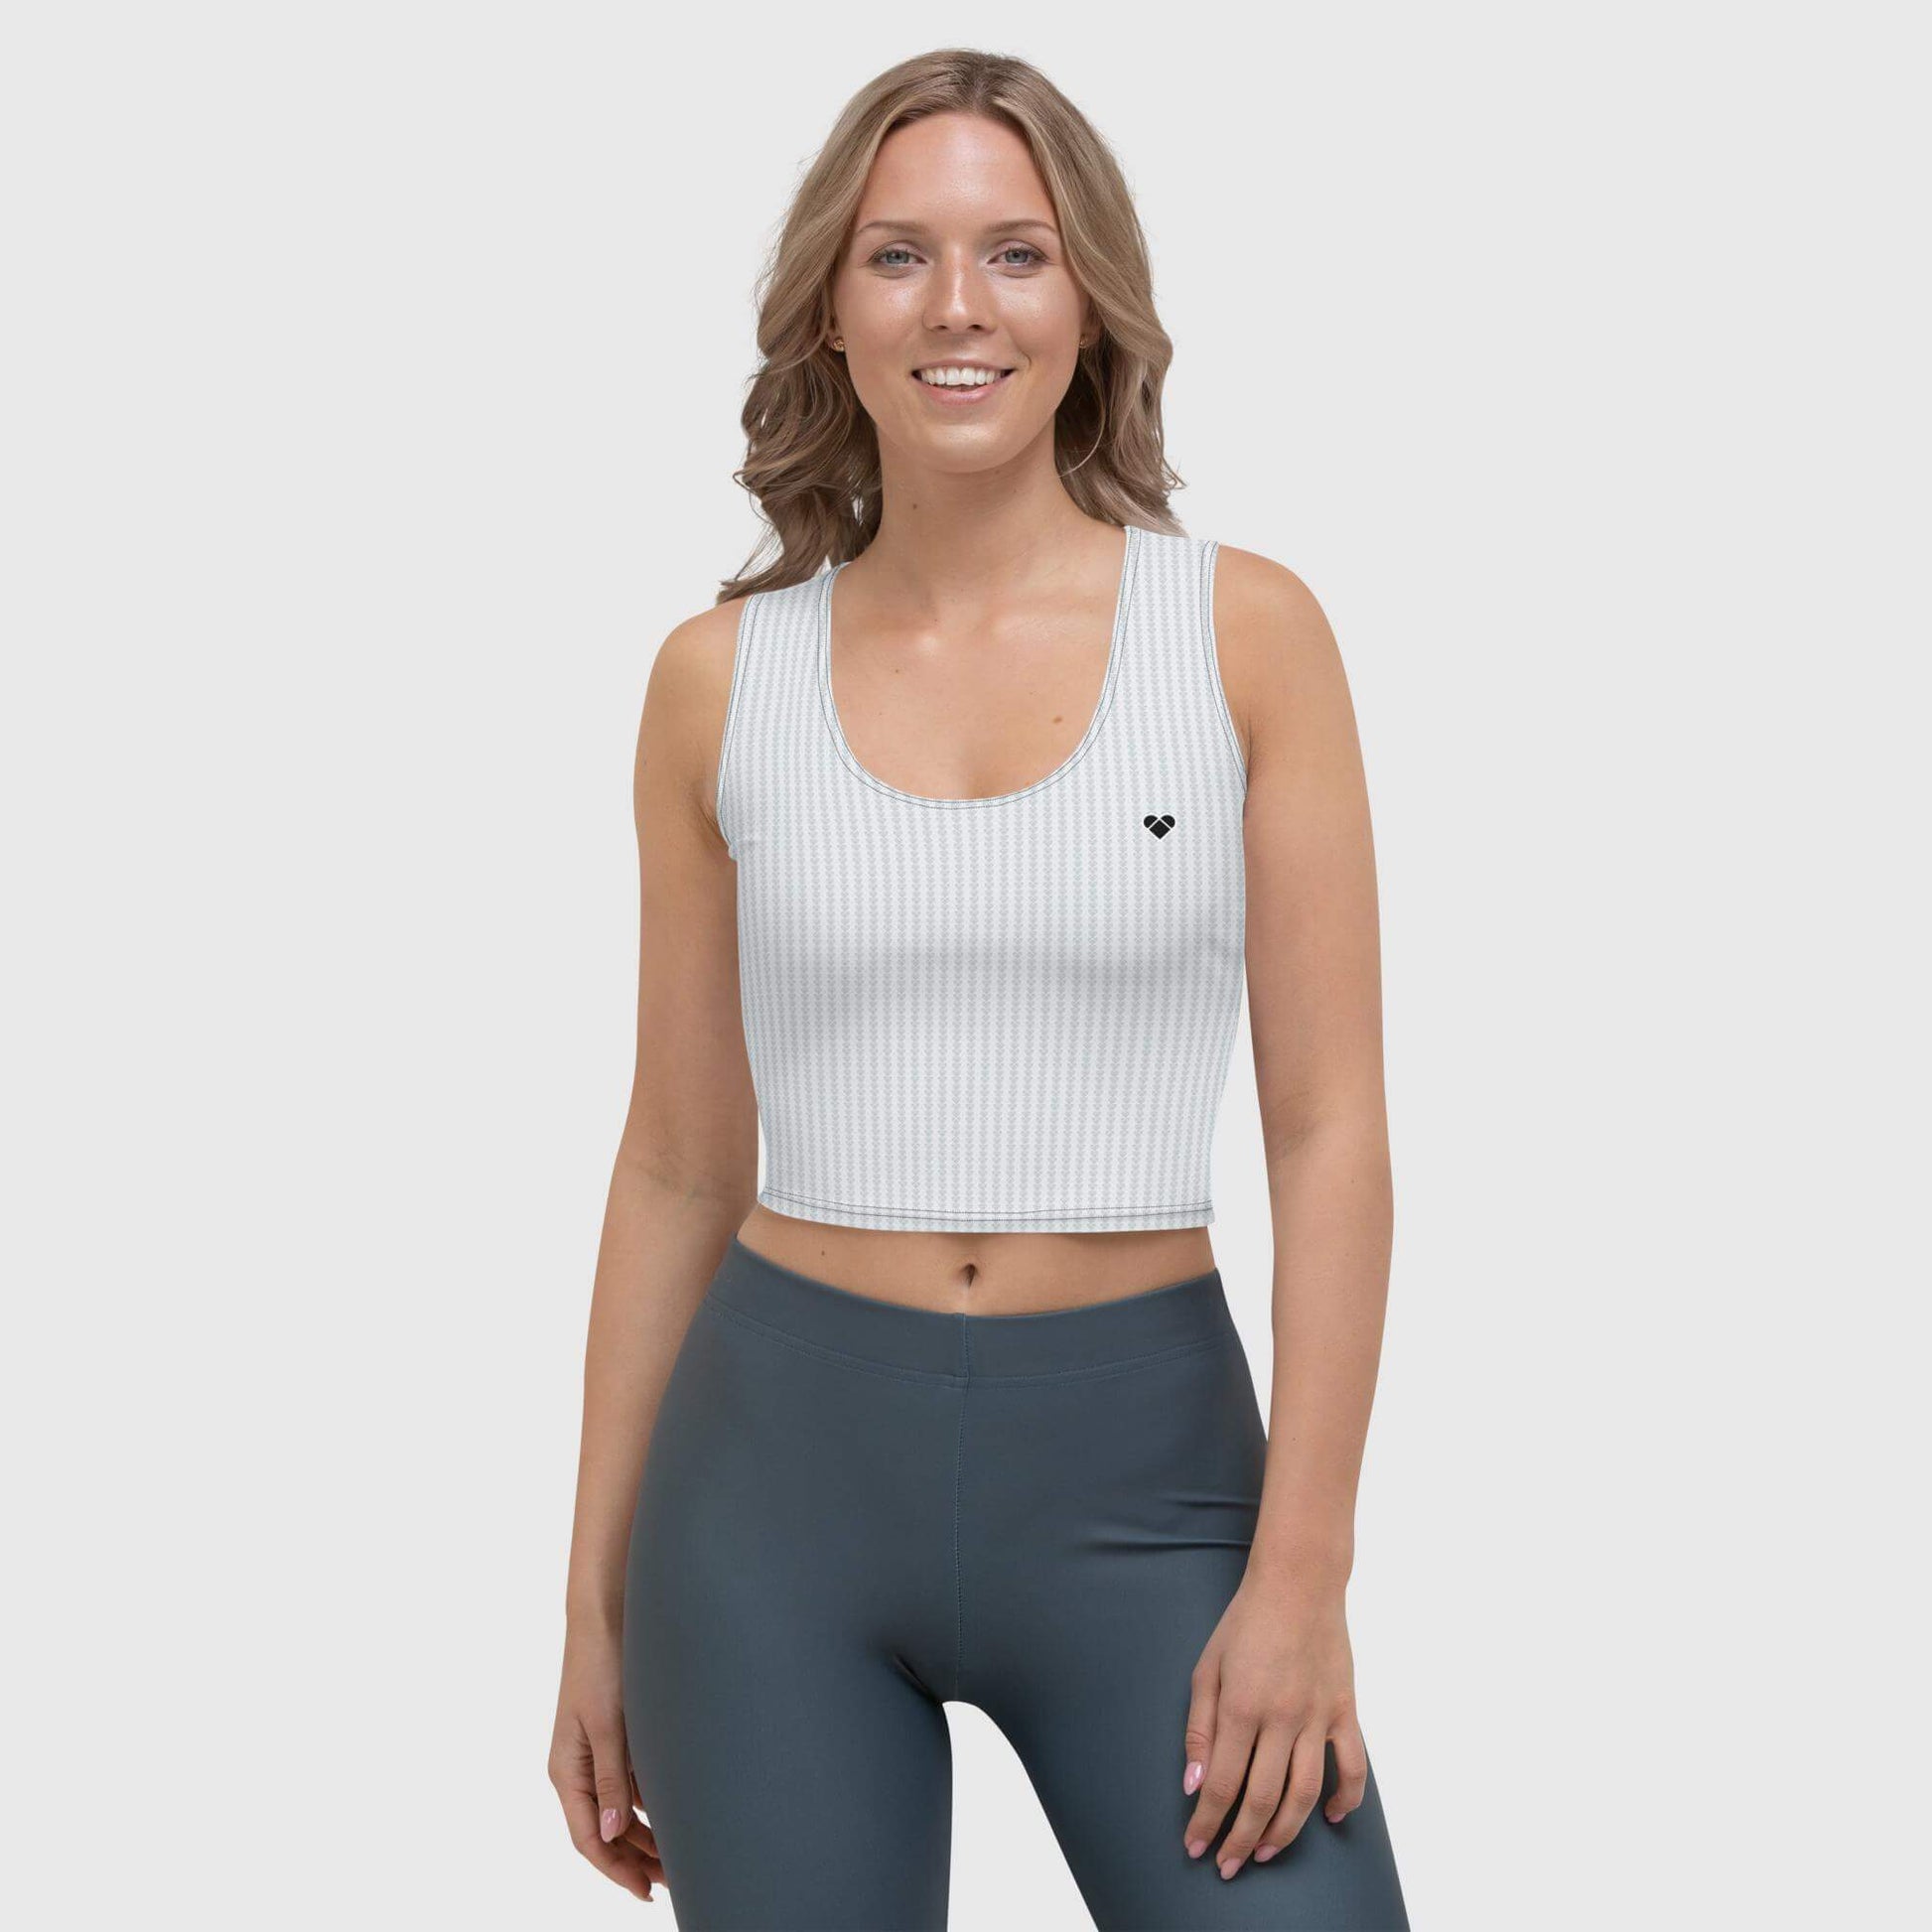 female model wearing lovogram heart crop top for women, perfect for sporty and sassy looks.